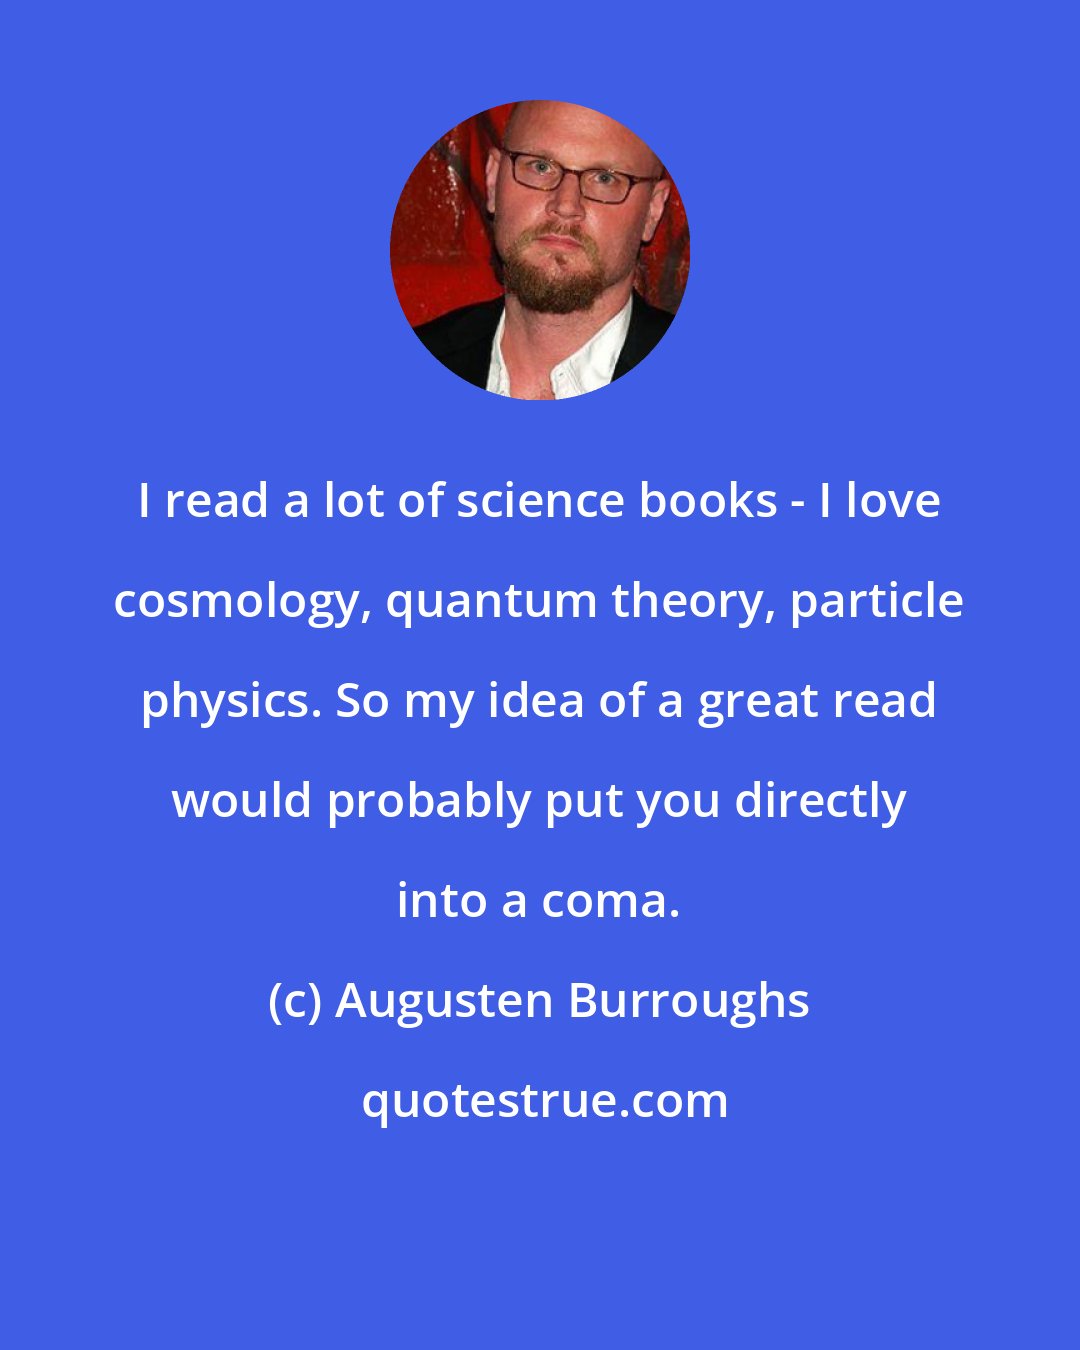 Augusten Burroughs: I read a lot of science books - I love cosmology, quantum theory, particle physics. So my idea of a great read would probably put you directly into a coma.